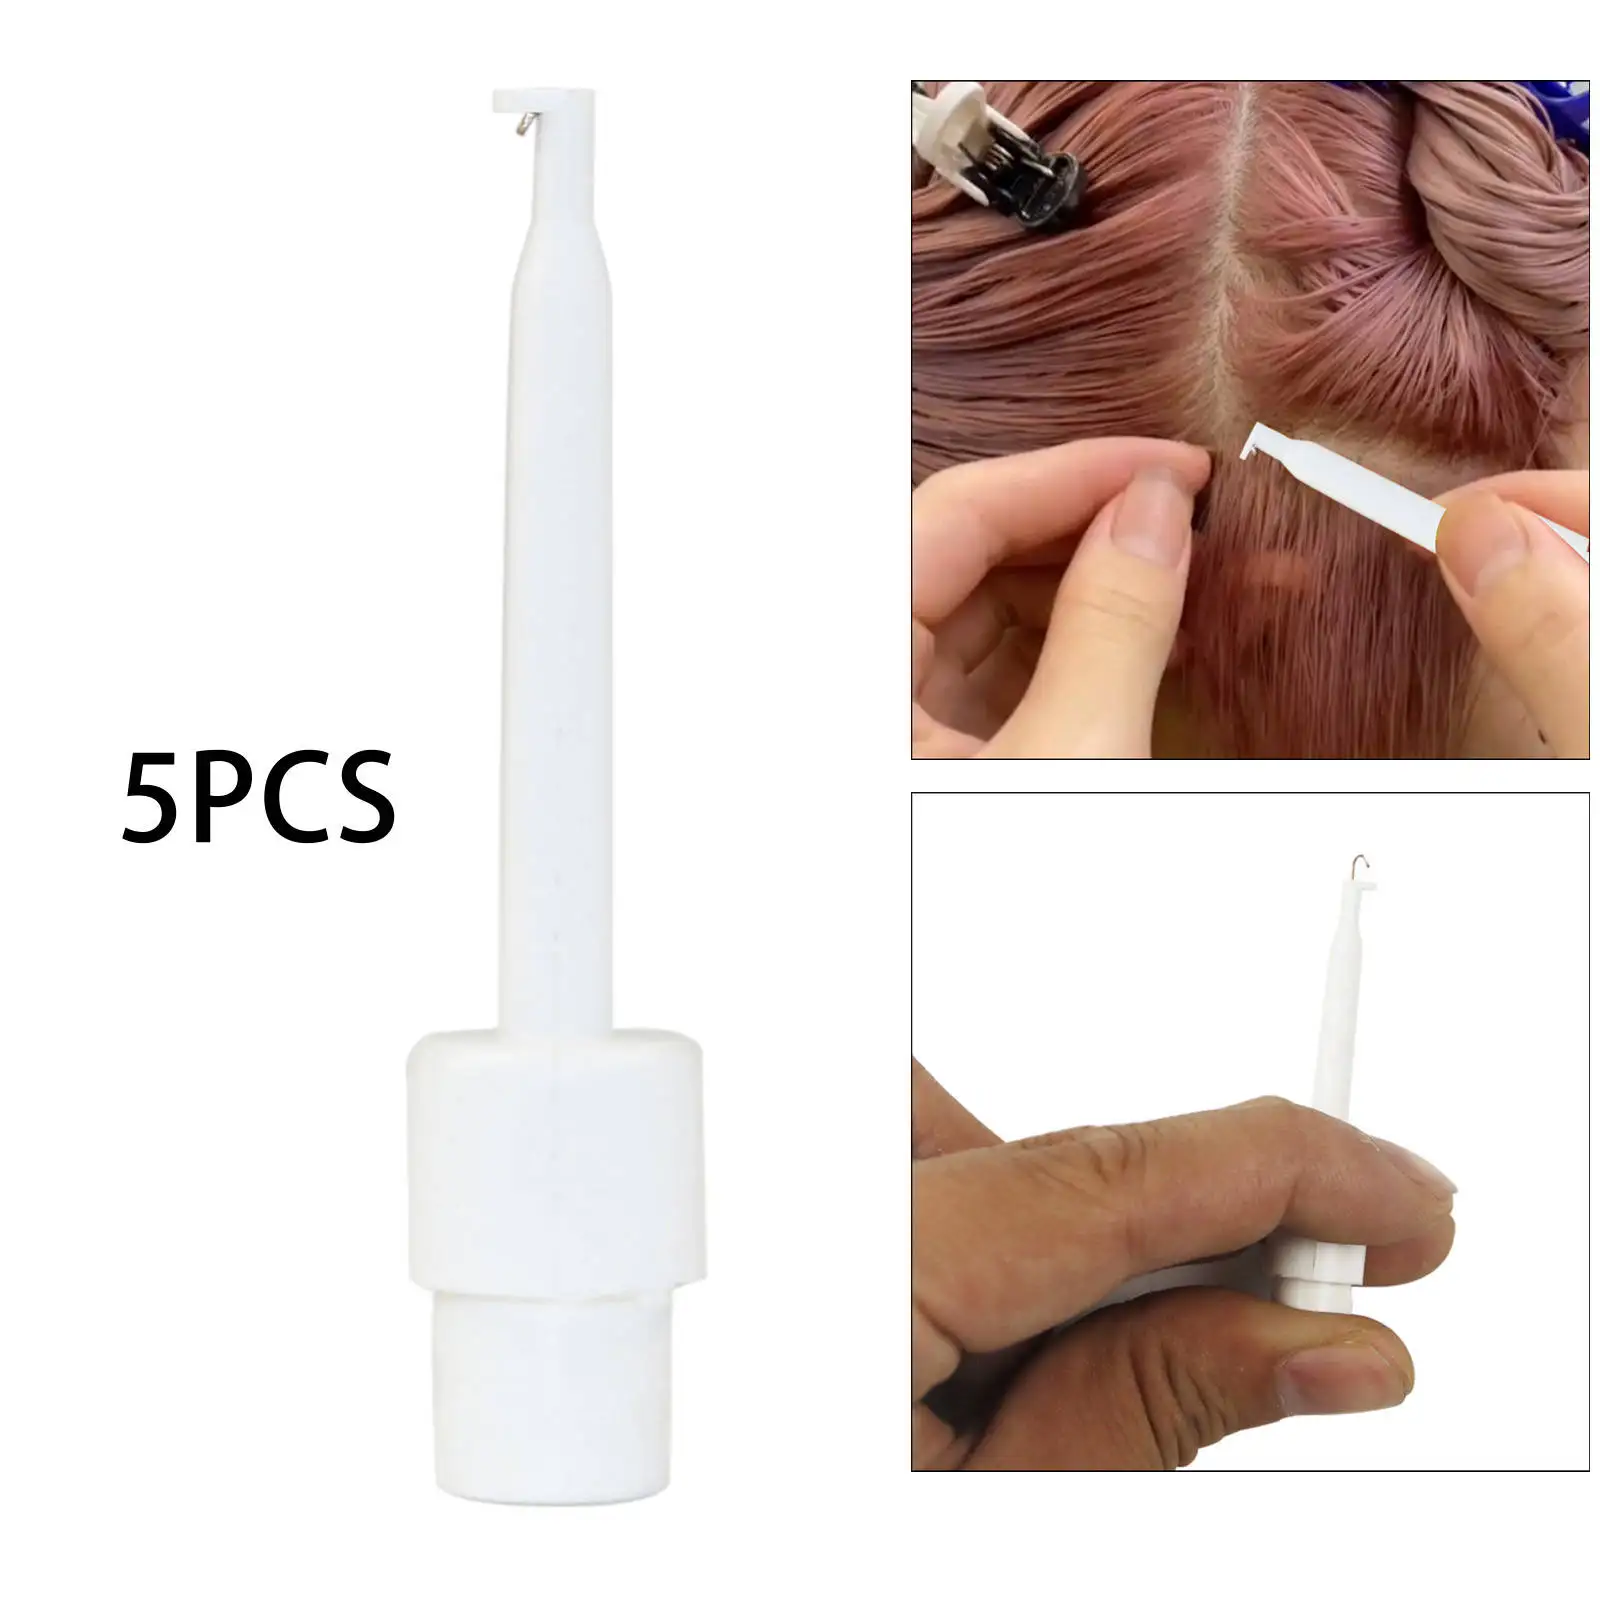 Hair Extension Tools Professional Durable Hook for DIY Hairstyle Beginner Hairstyling